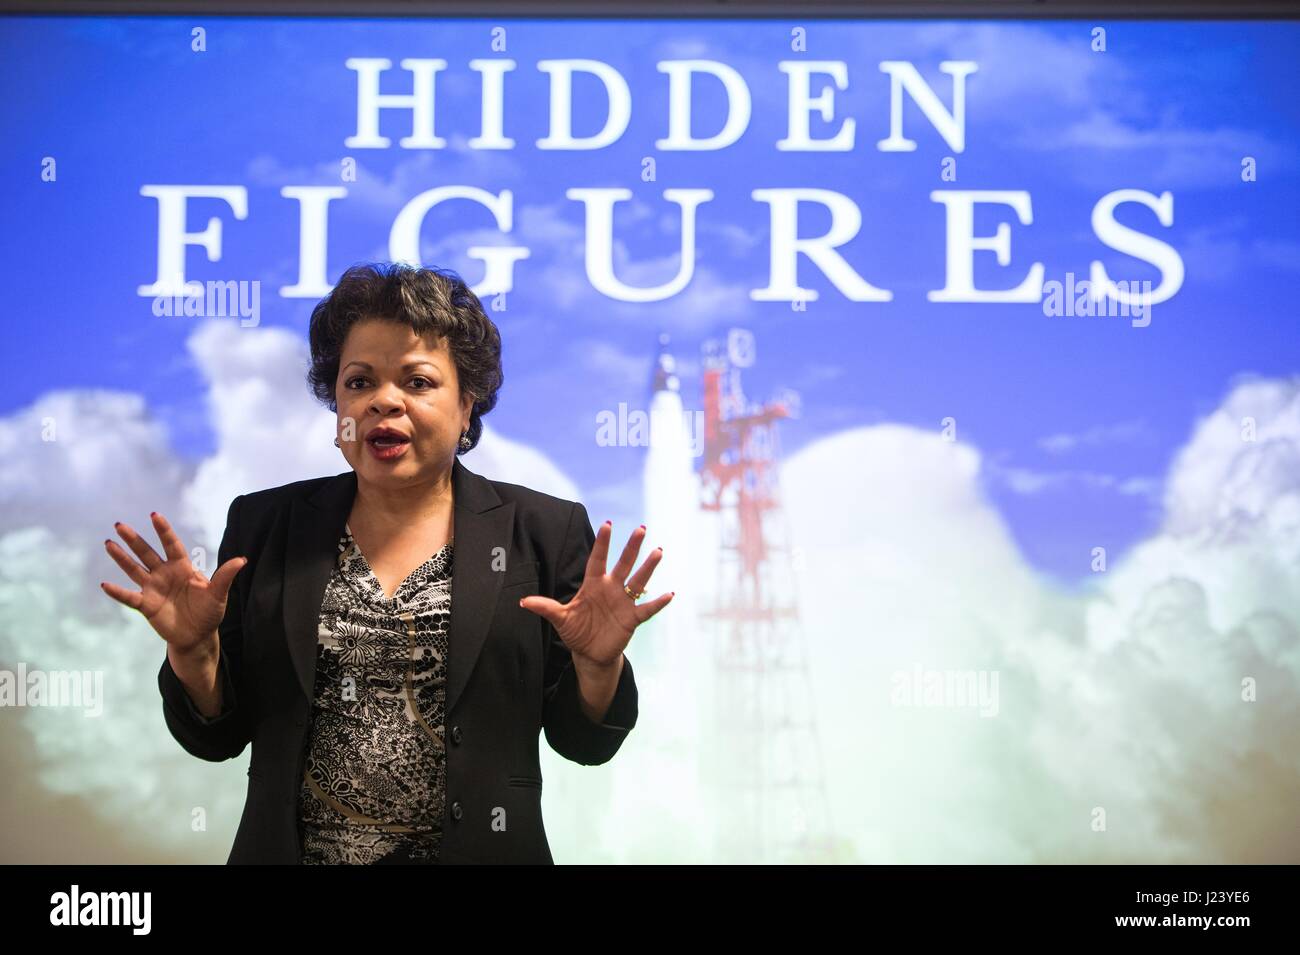 NASA Langley Research Center Director of the Office of Eduction Janet Sellars speaks during a Hidden Figures film event at the NASA Headquarters February 15, 2017 in Washington, DC.    (photo by Aubrey Gemignani /NASA  via Planetpix) Stock Photo